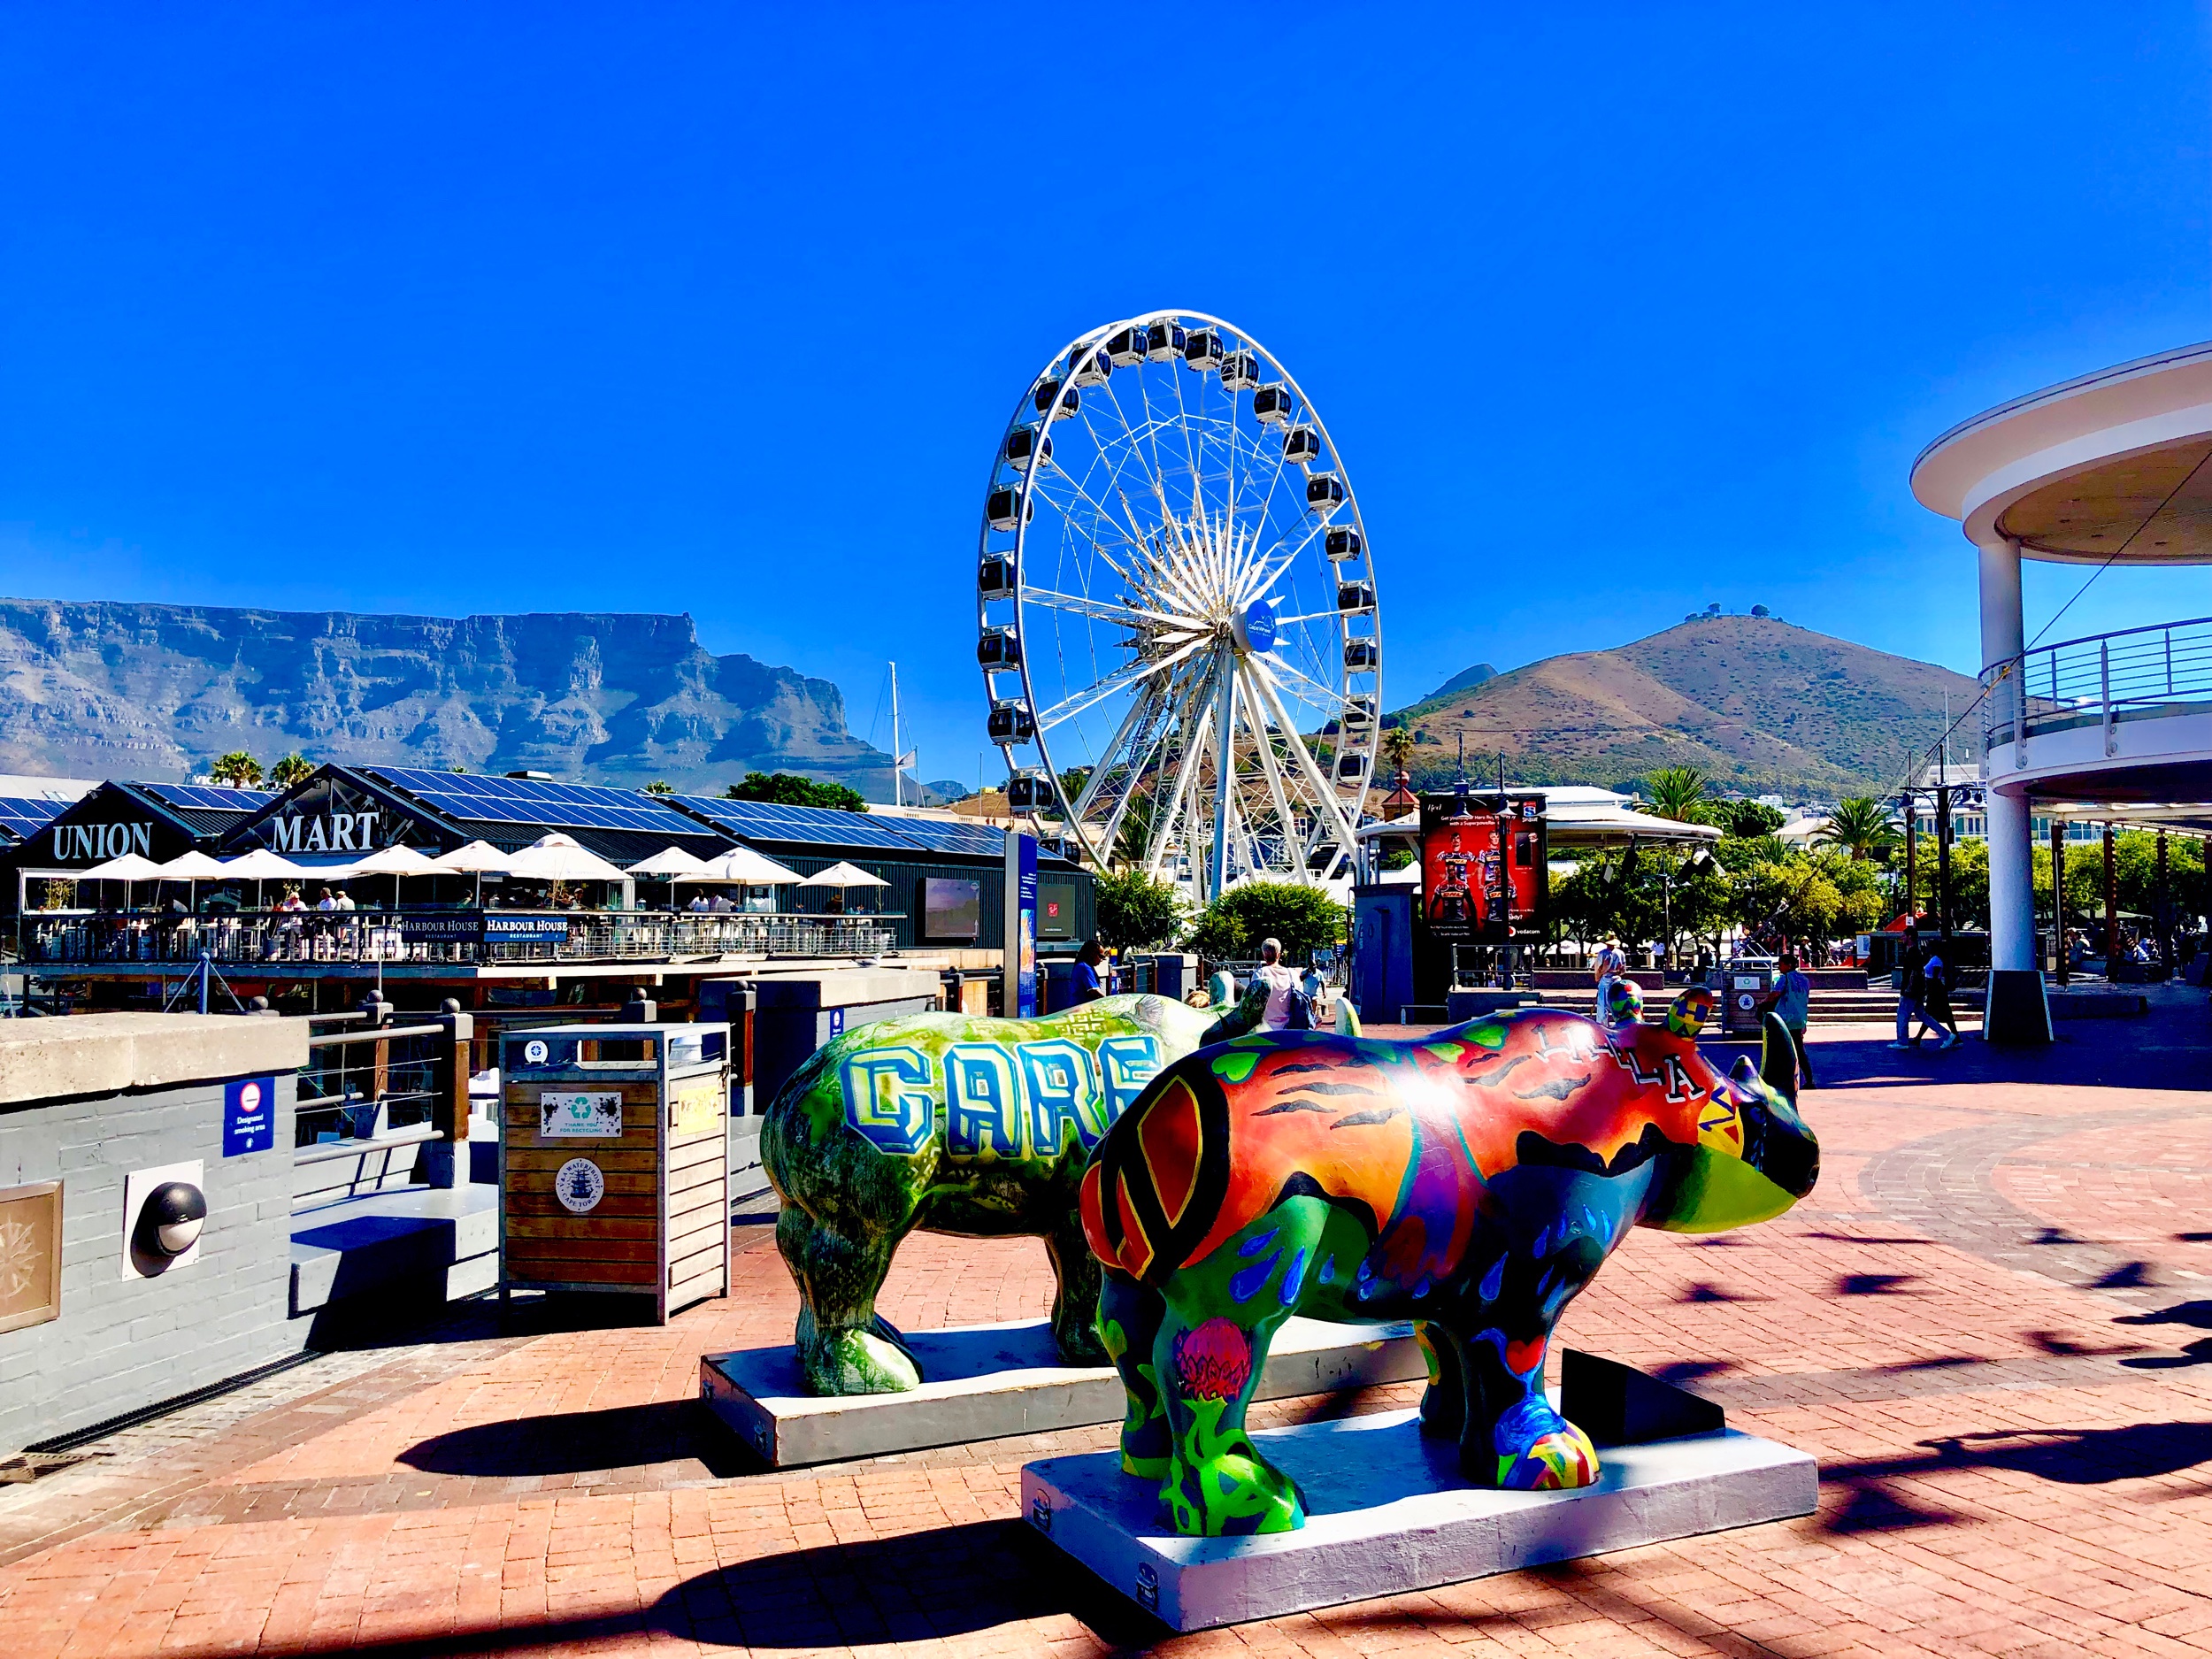 10 best ways to explore Cape Town's V&A Waterfront - Lonely Planet